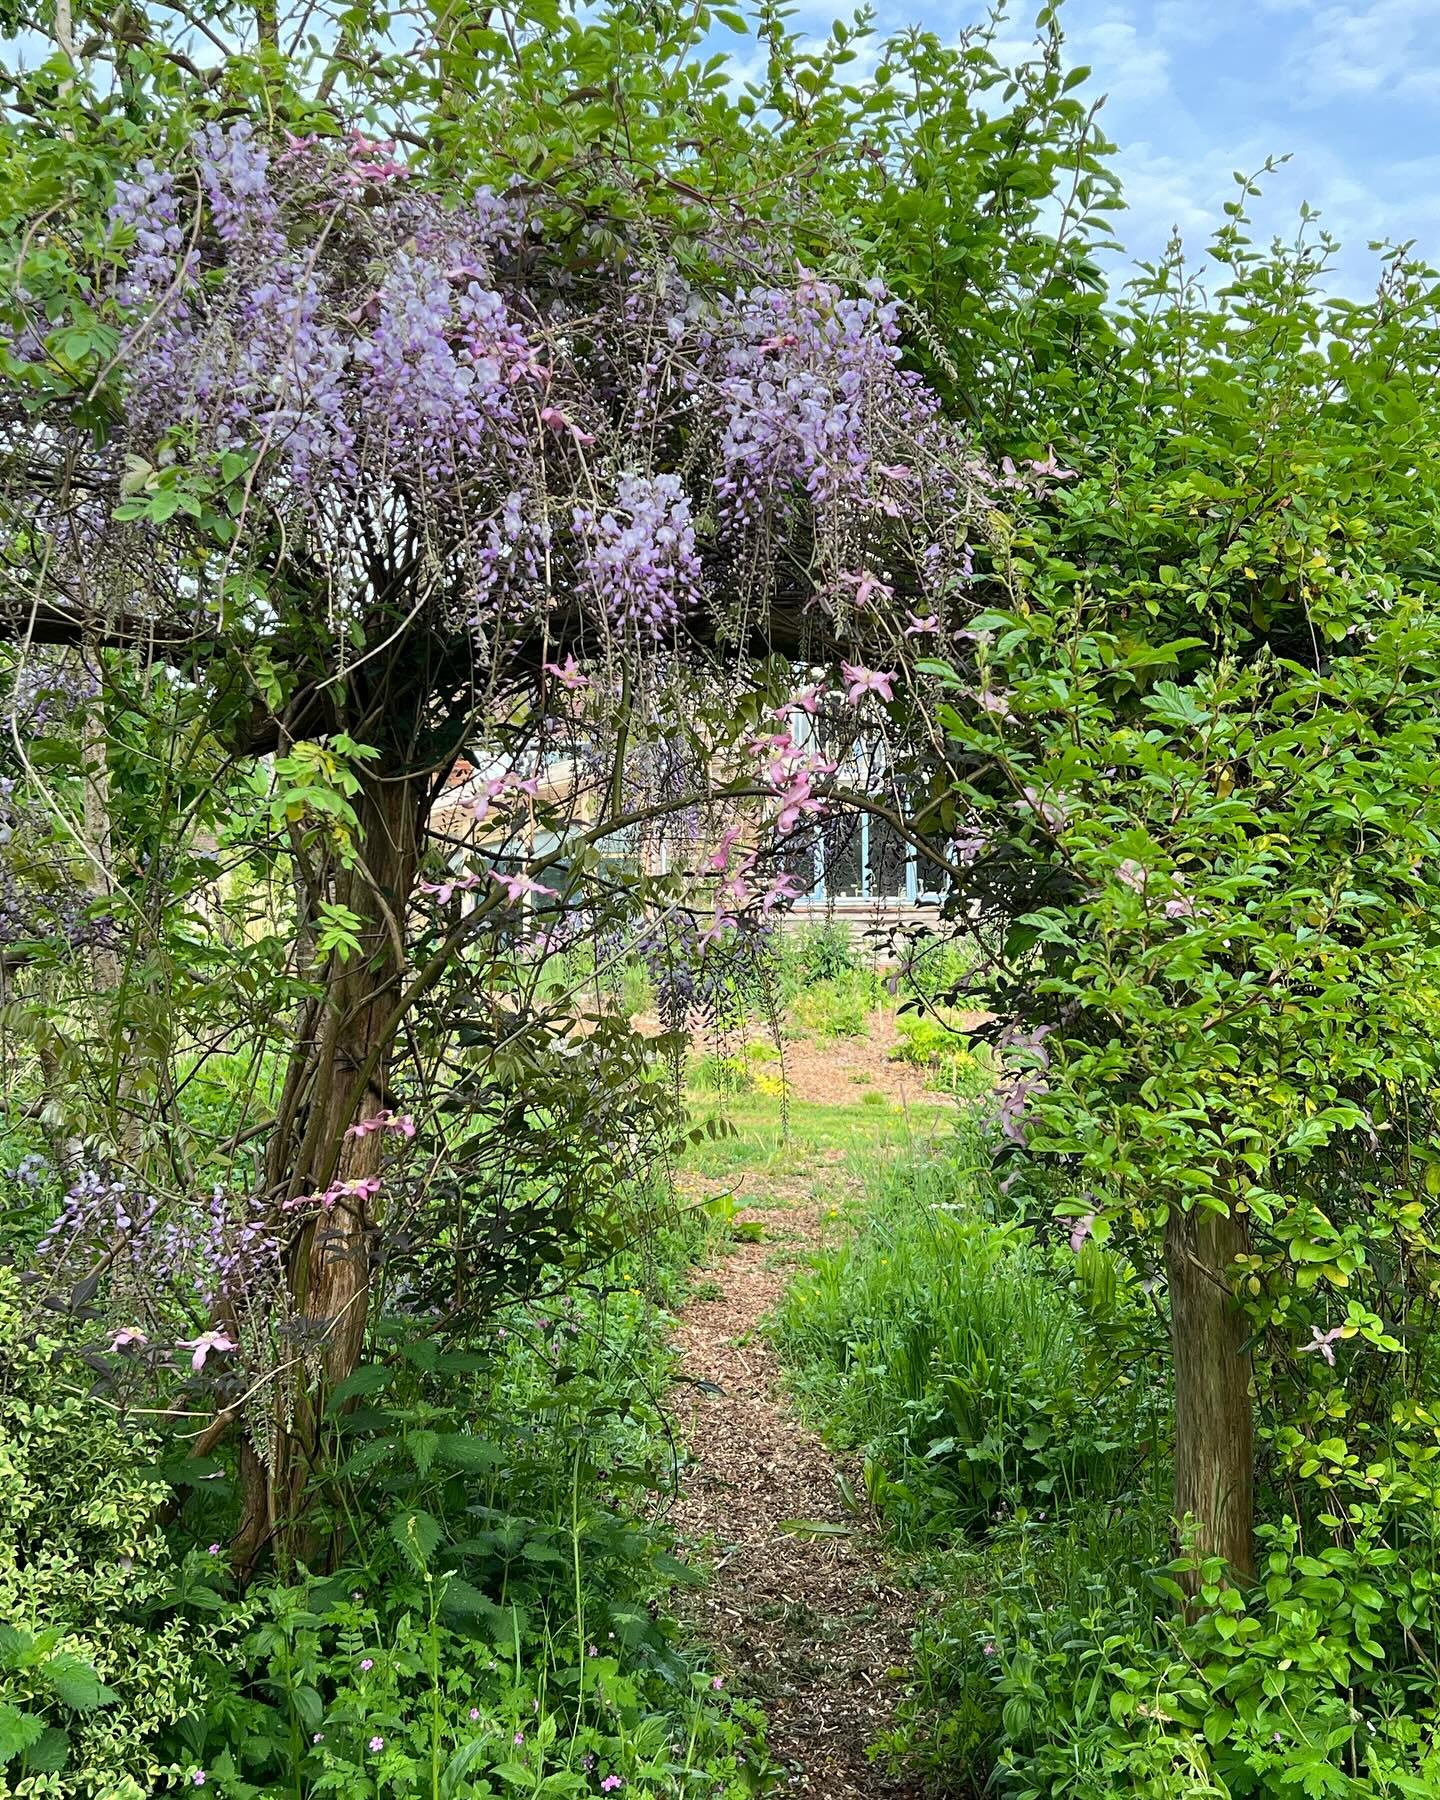 May time in the garden at Castle Orchard. So soothing and immersive as the plants fill the space. Even the roses are starting to blossom in this welcome warmth. A beautiful time of year for my last course before autumn &lsquo;Introduction to herbal m